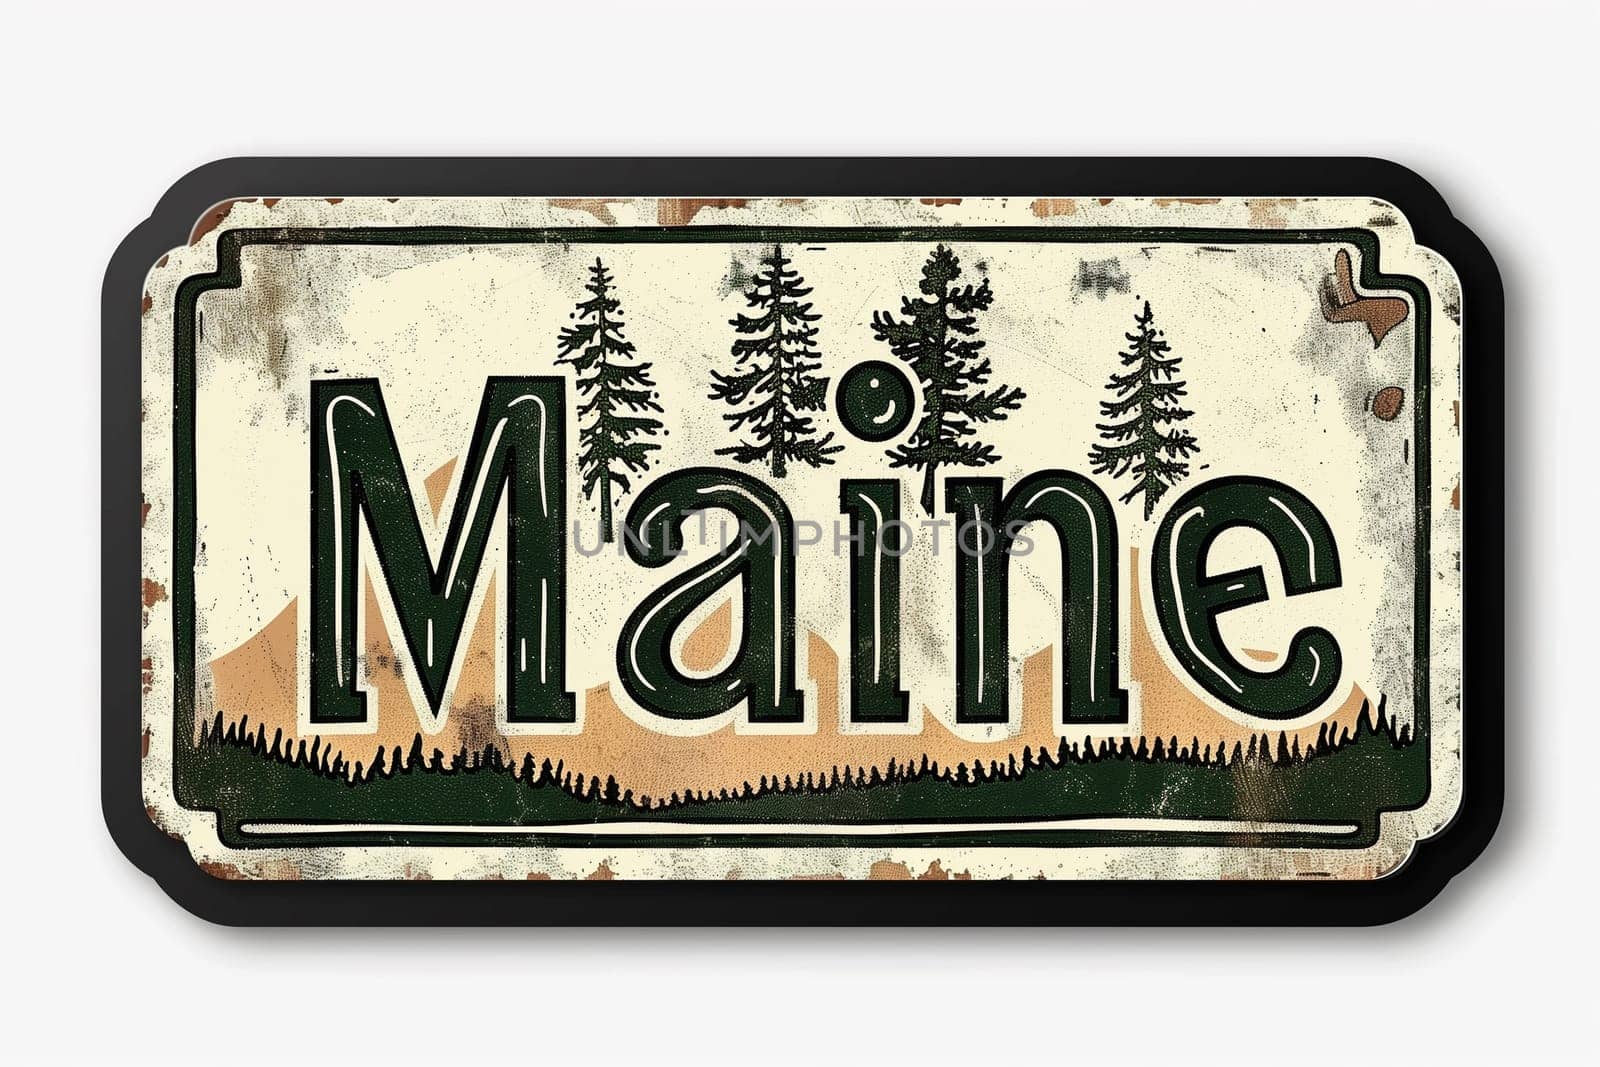 Maine Sign With Trees in Background by Sd28DimoN_1976